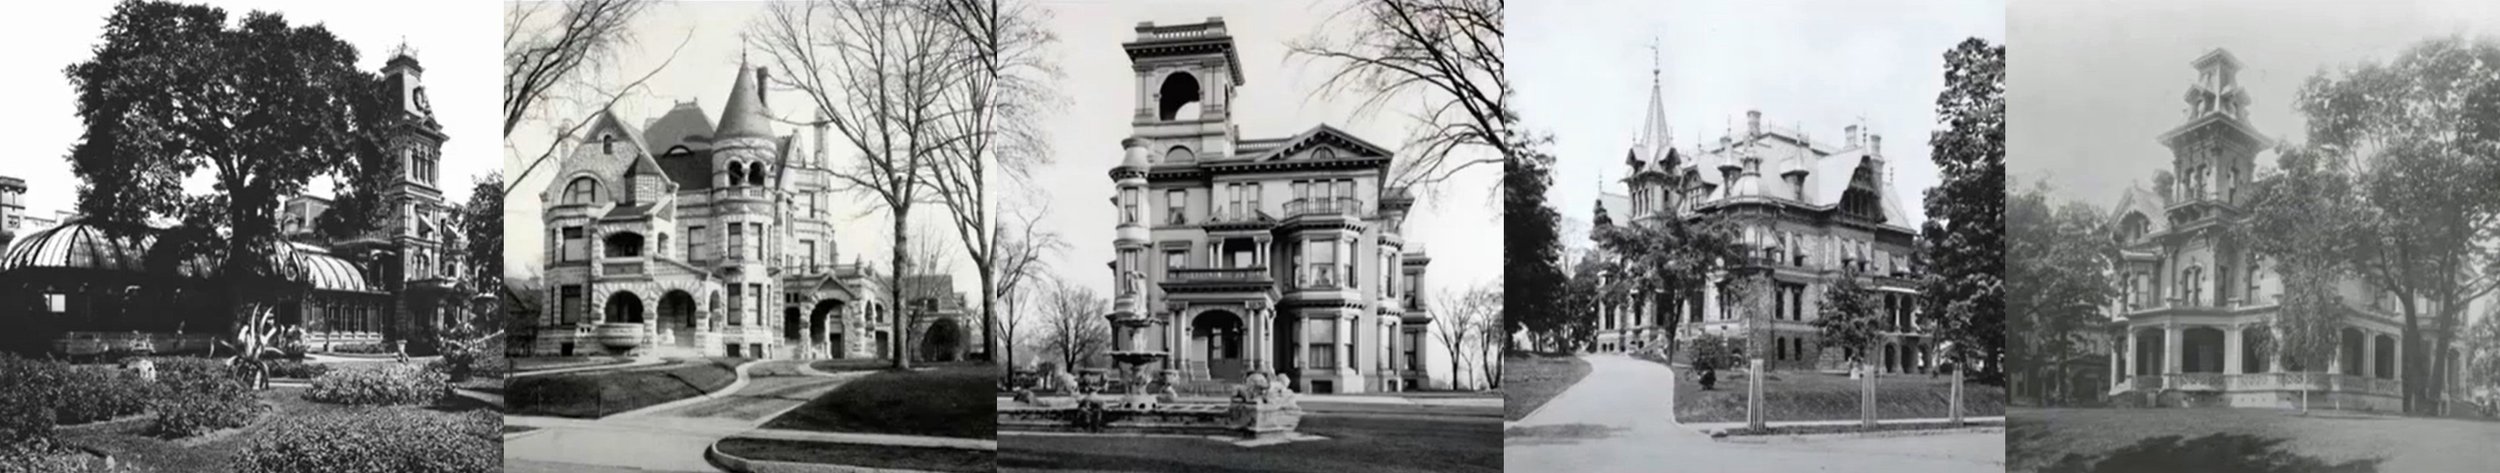 ONLINE - The Mansions of Milwaukee's Grand Avenue